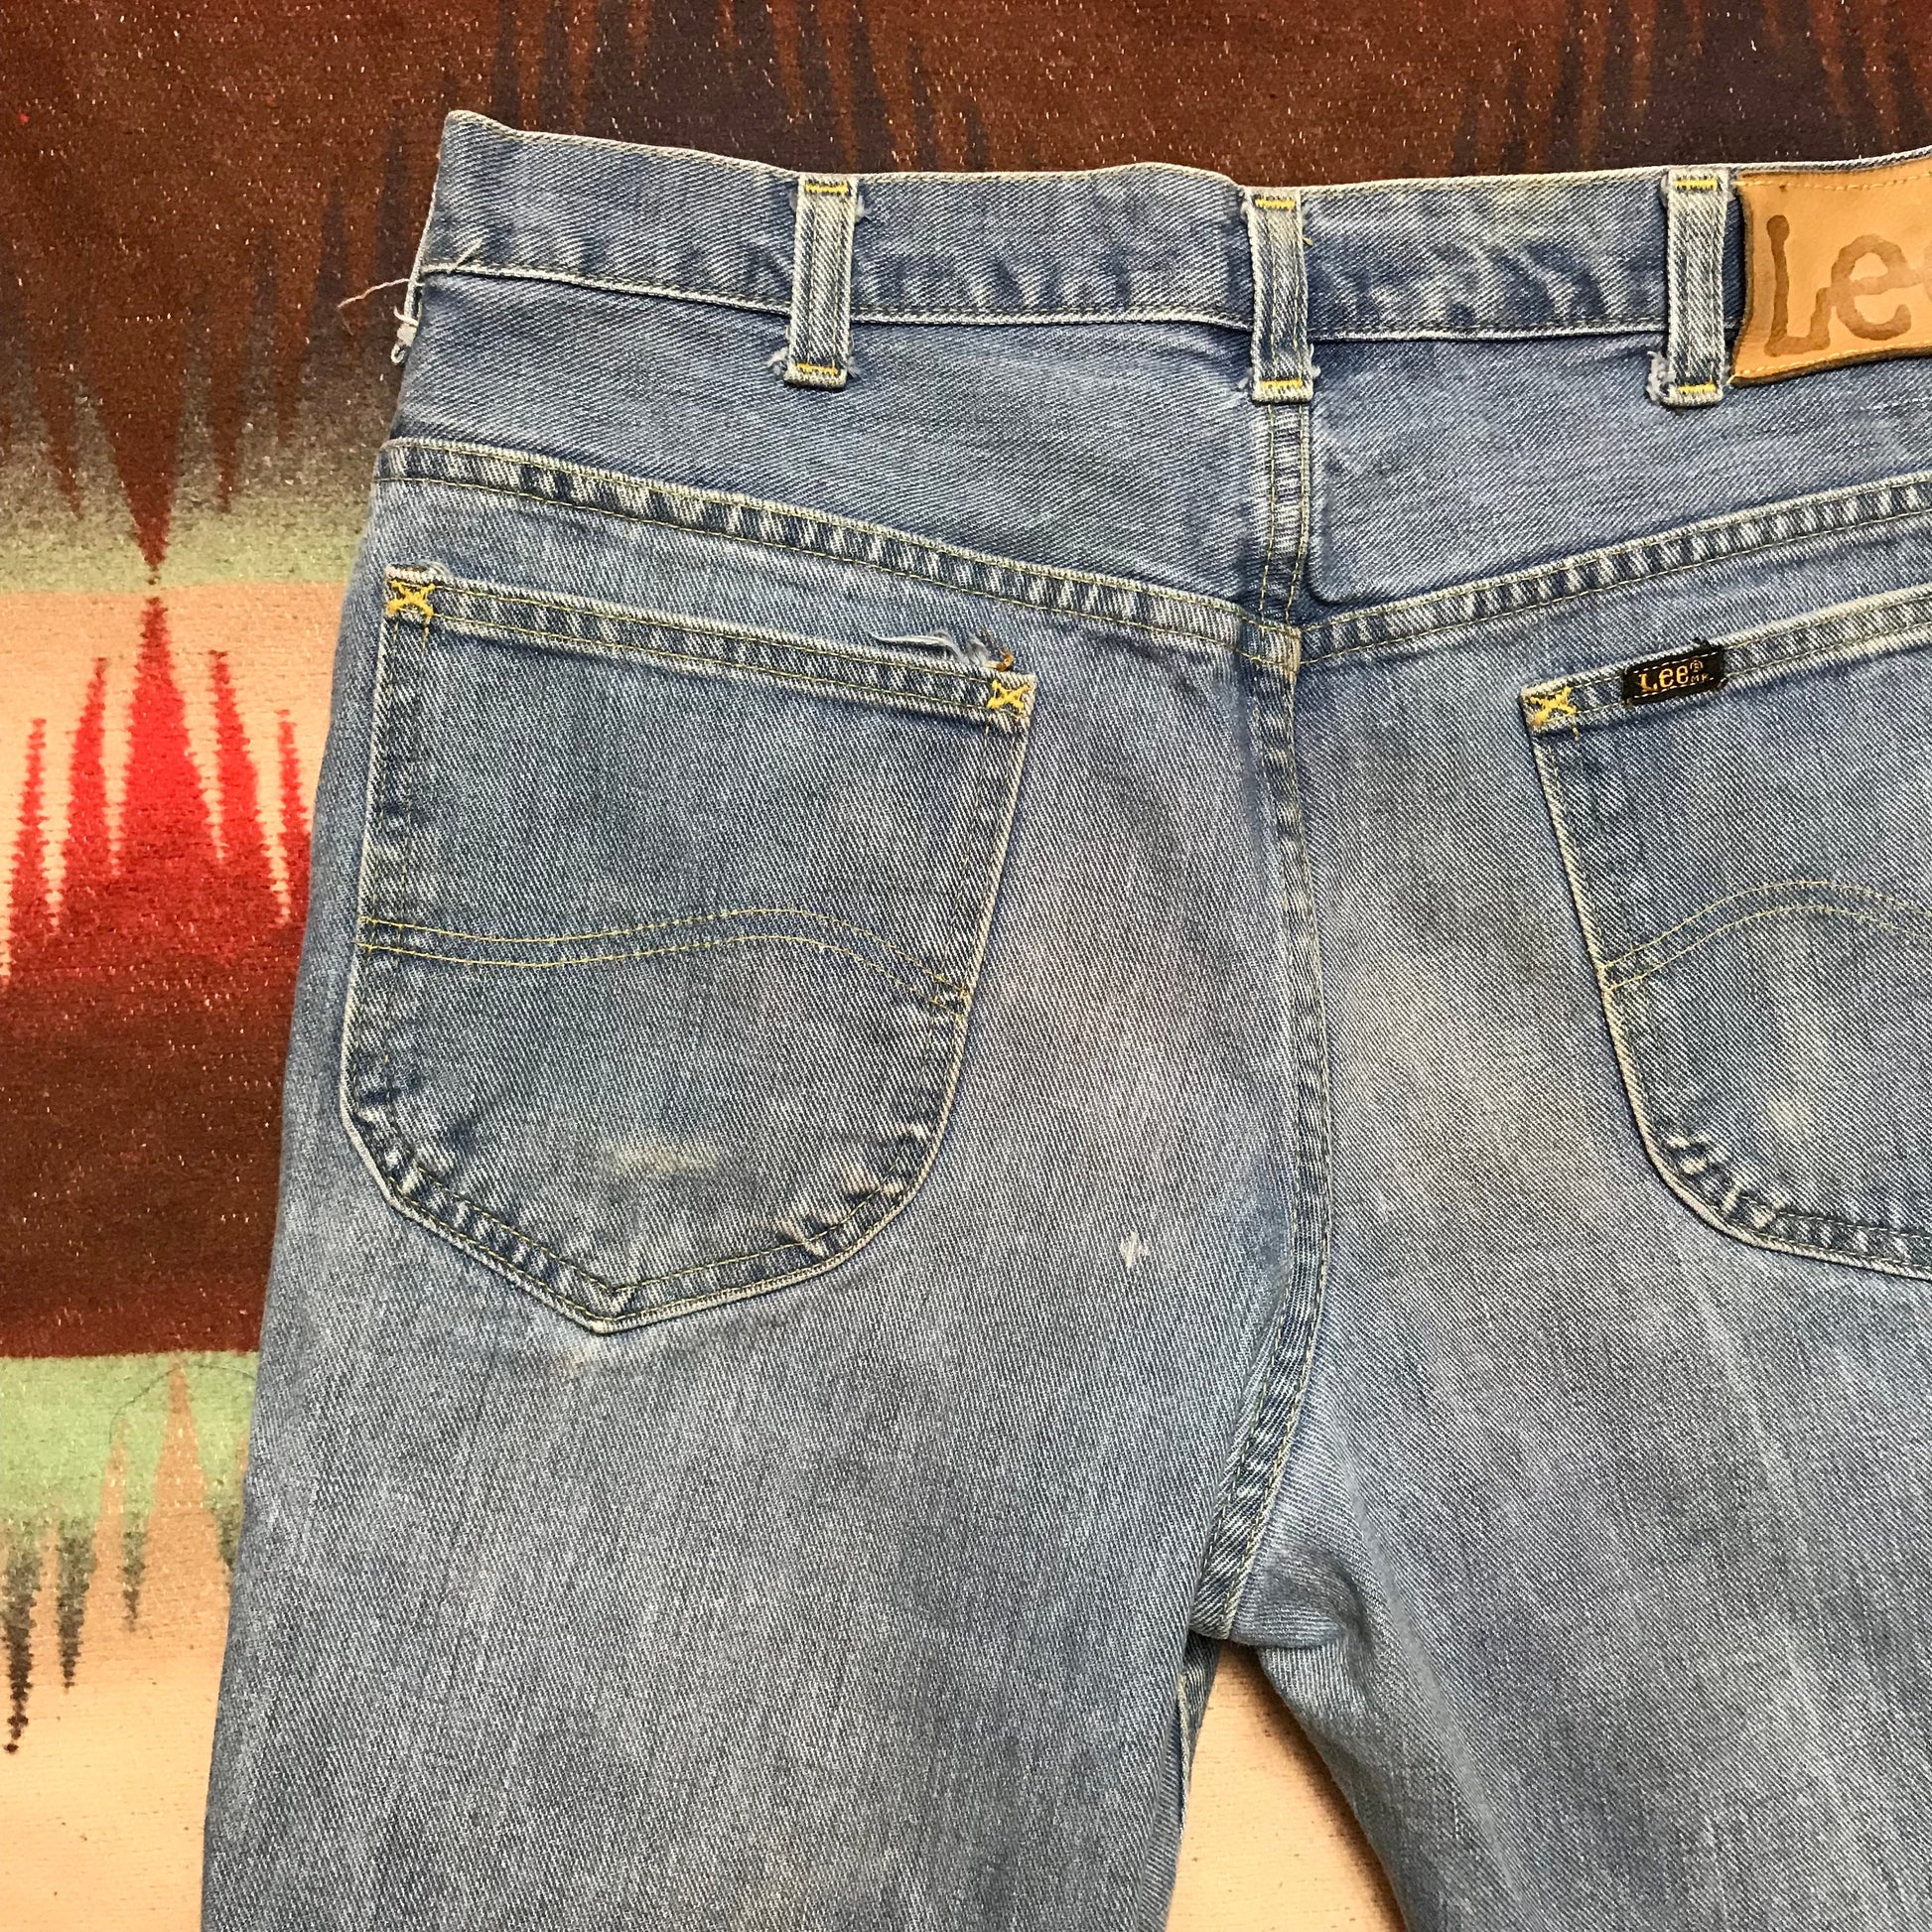 1970s Lightwash Lee Riders Jeans Made in USA Size 31x31